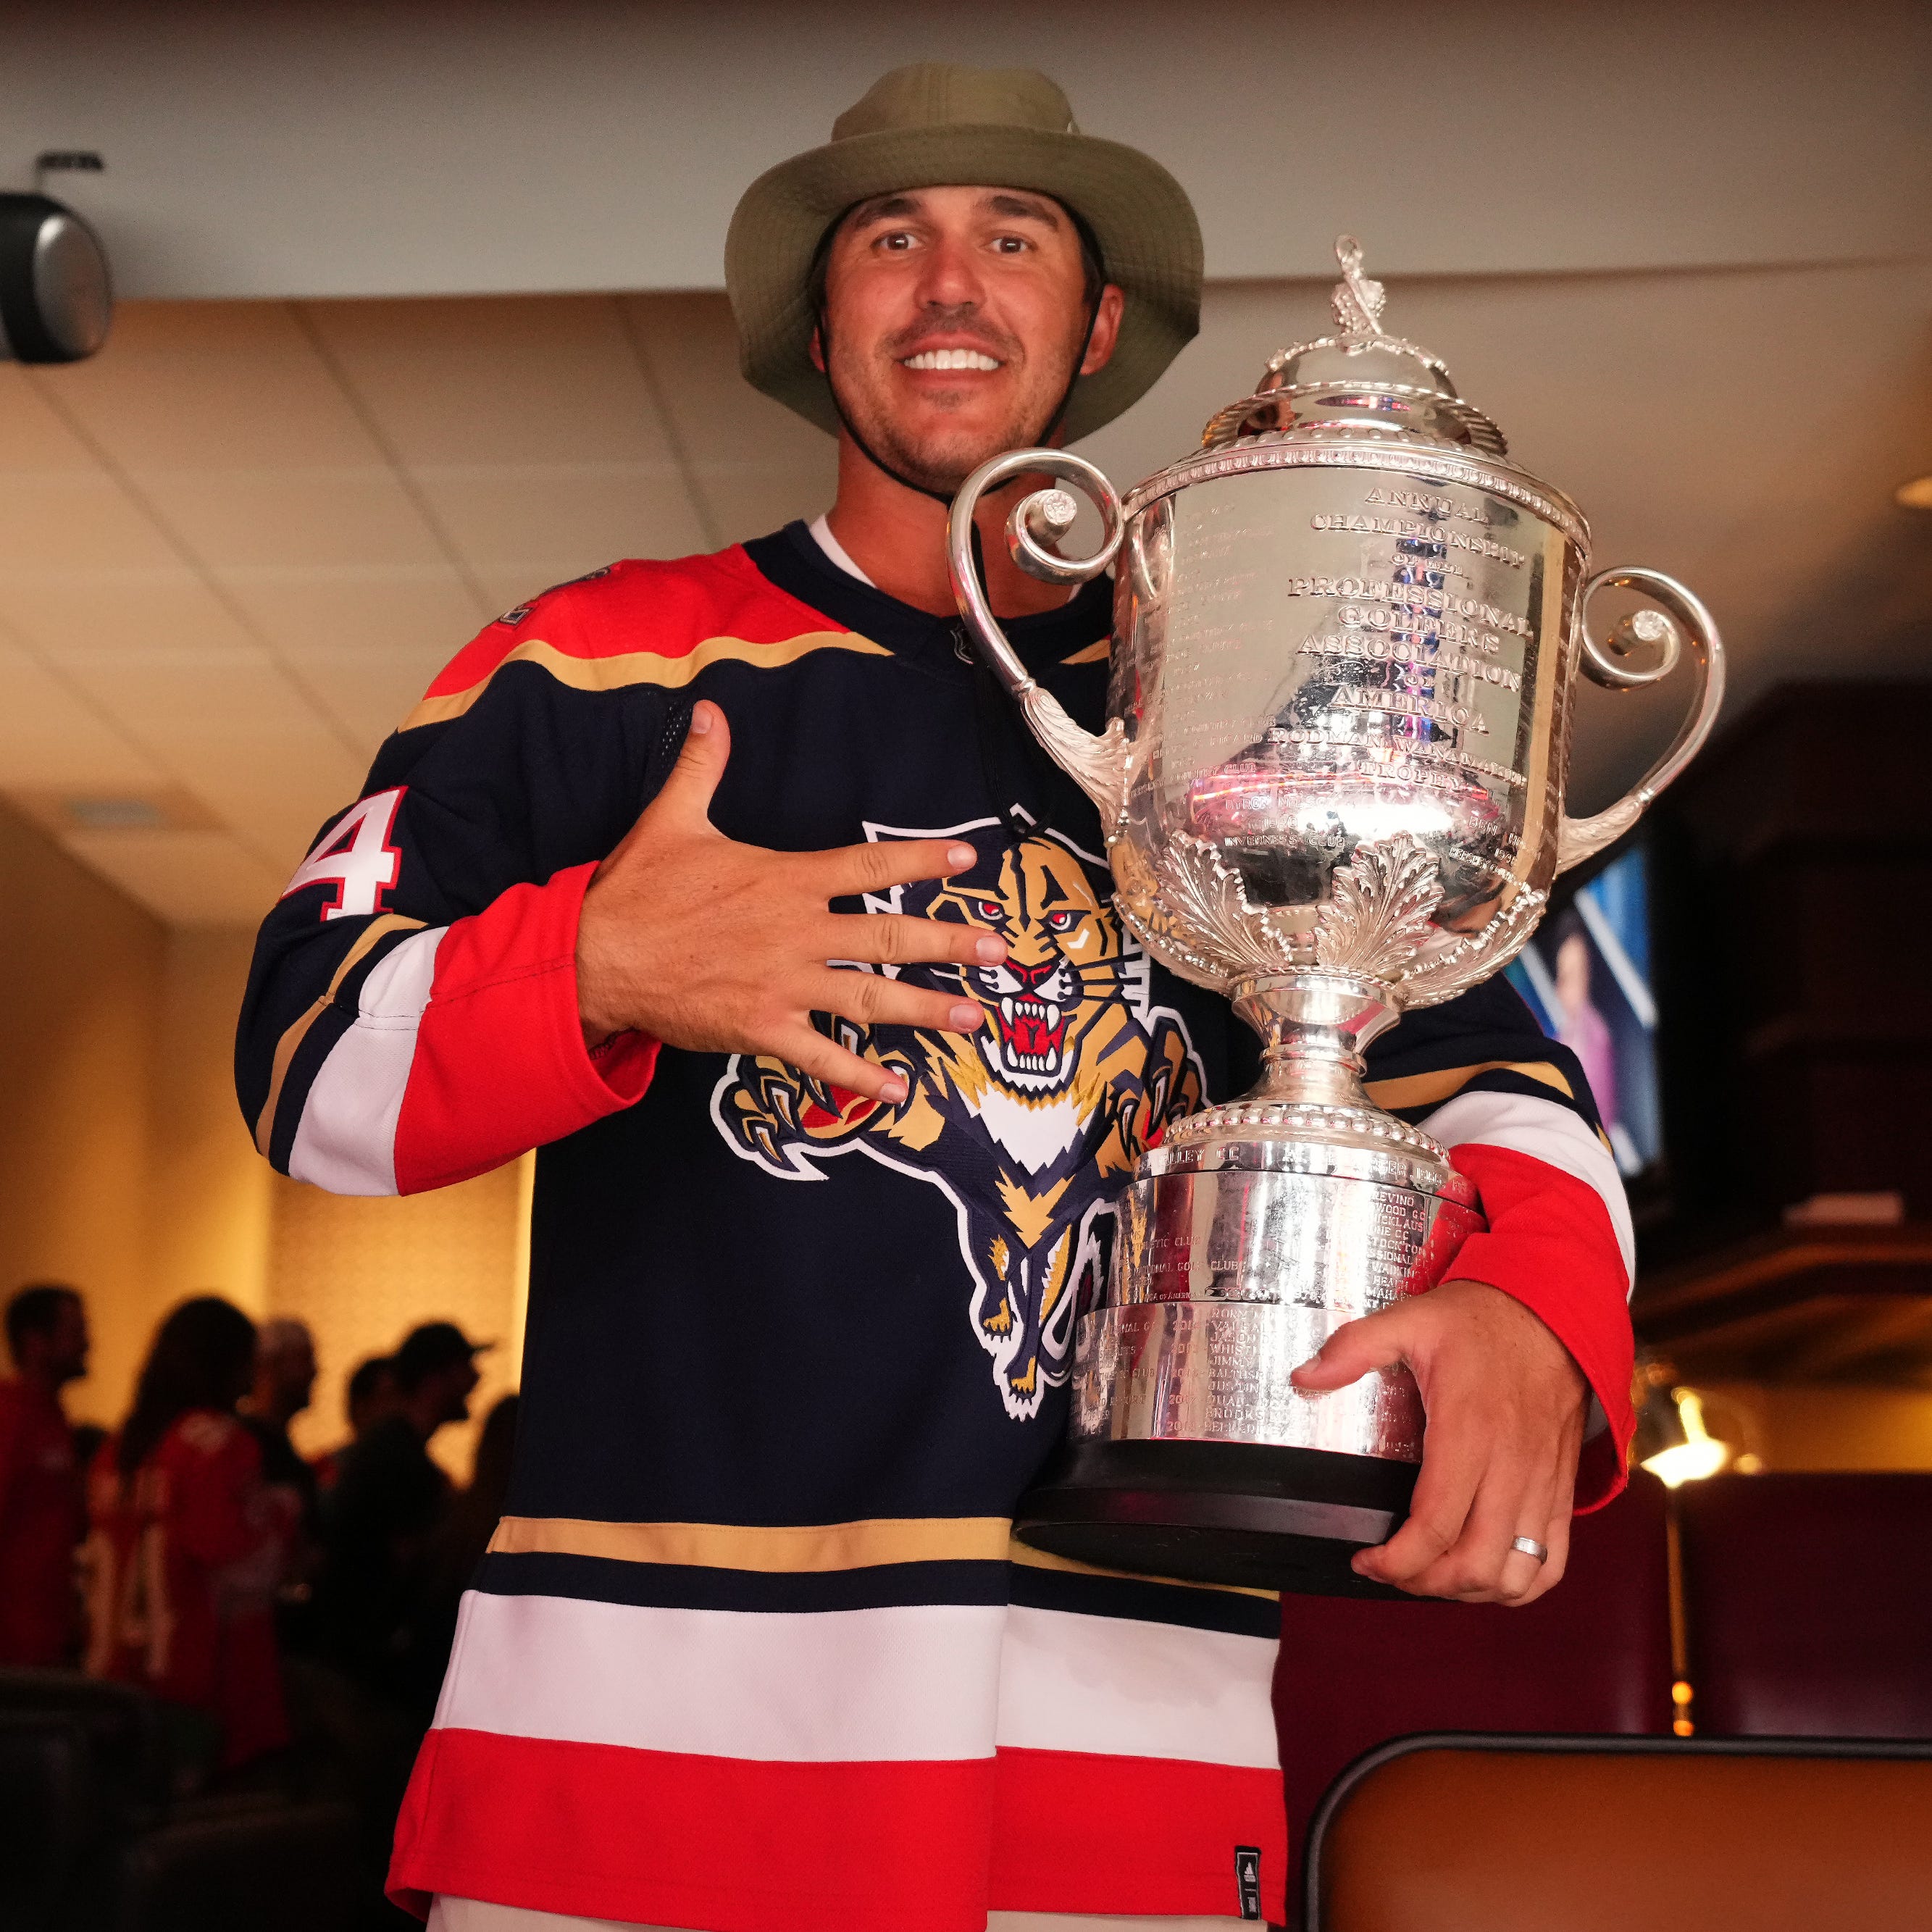 Pro golfer Brooks Koepka poses with the Wanamaker Trophy while attending game three of the Eastern Conference Finals of the 2023 Stanley Cup Playoffs between the Florida Panthers and the Carolina Hurricanes at FLA Live Arena.